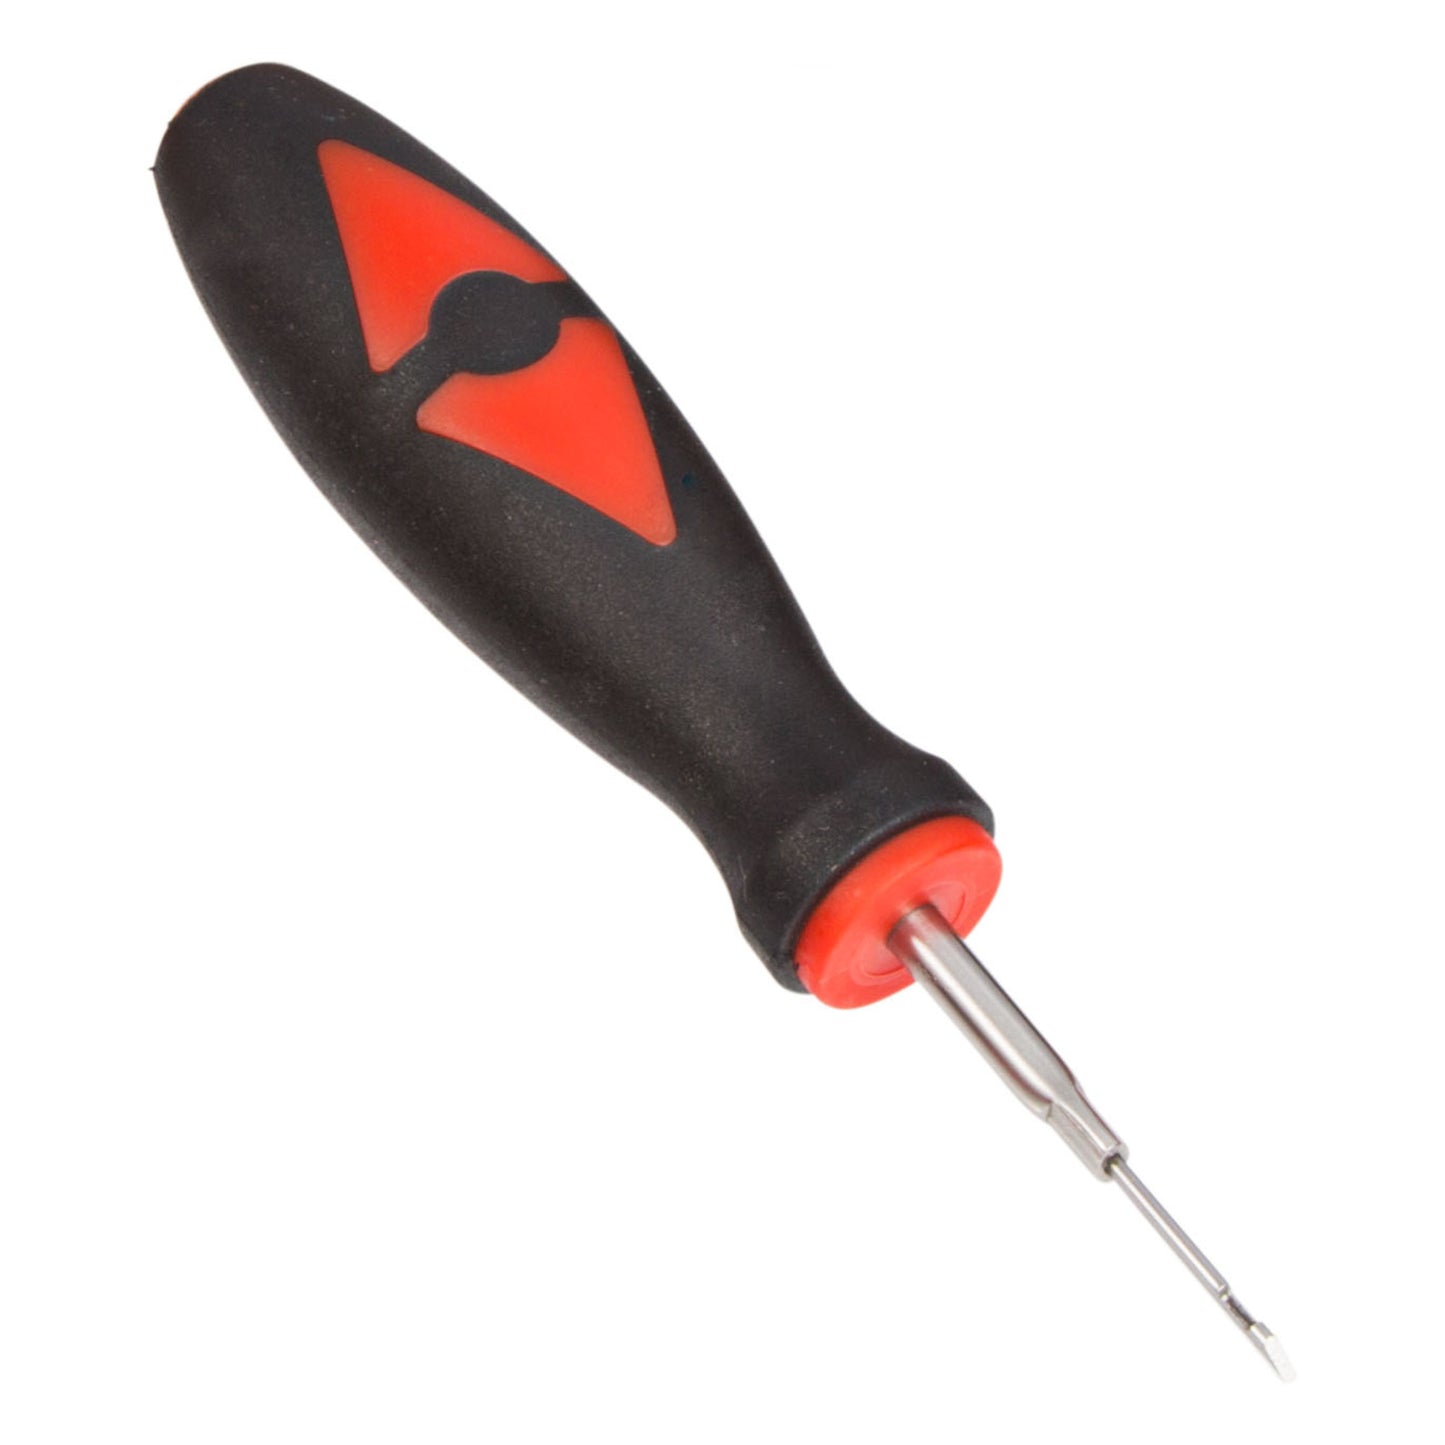 STEELMAN 1.00mm x 18.00mm Notched Flat Blade Automotive Terminal Tool designed to separate wires from their terminal blocks without causing damage to either